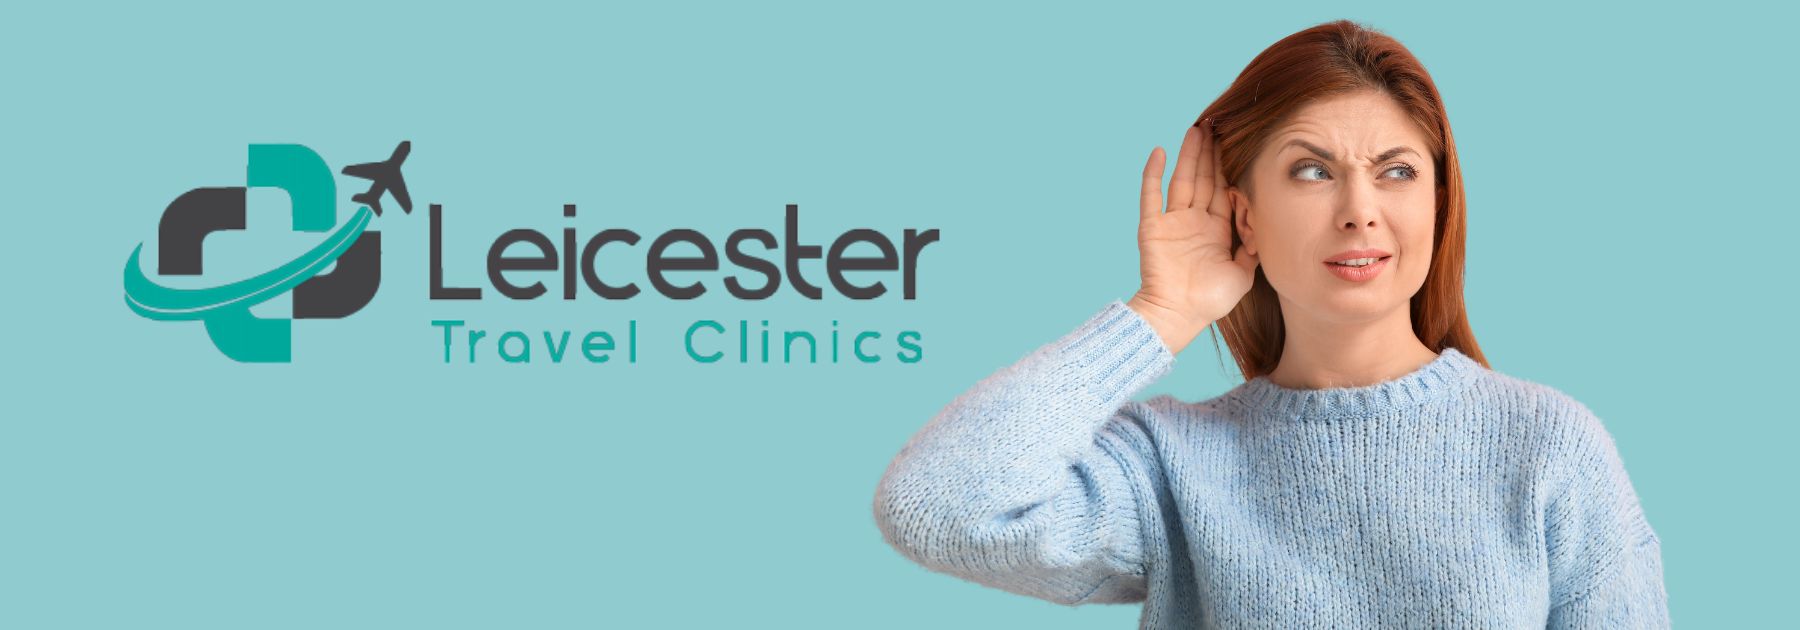 earwax removal leicester